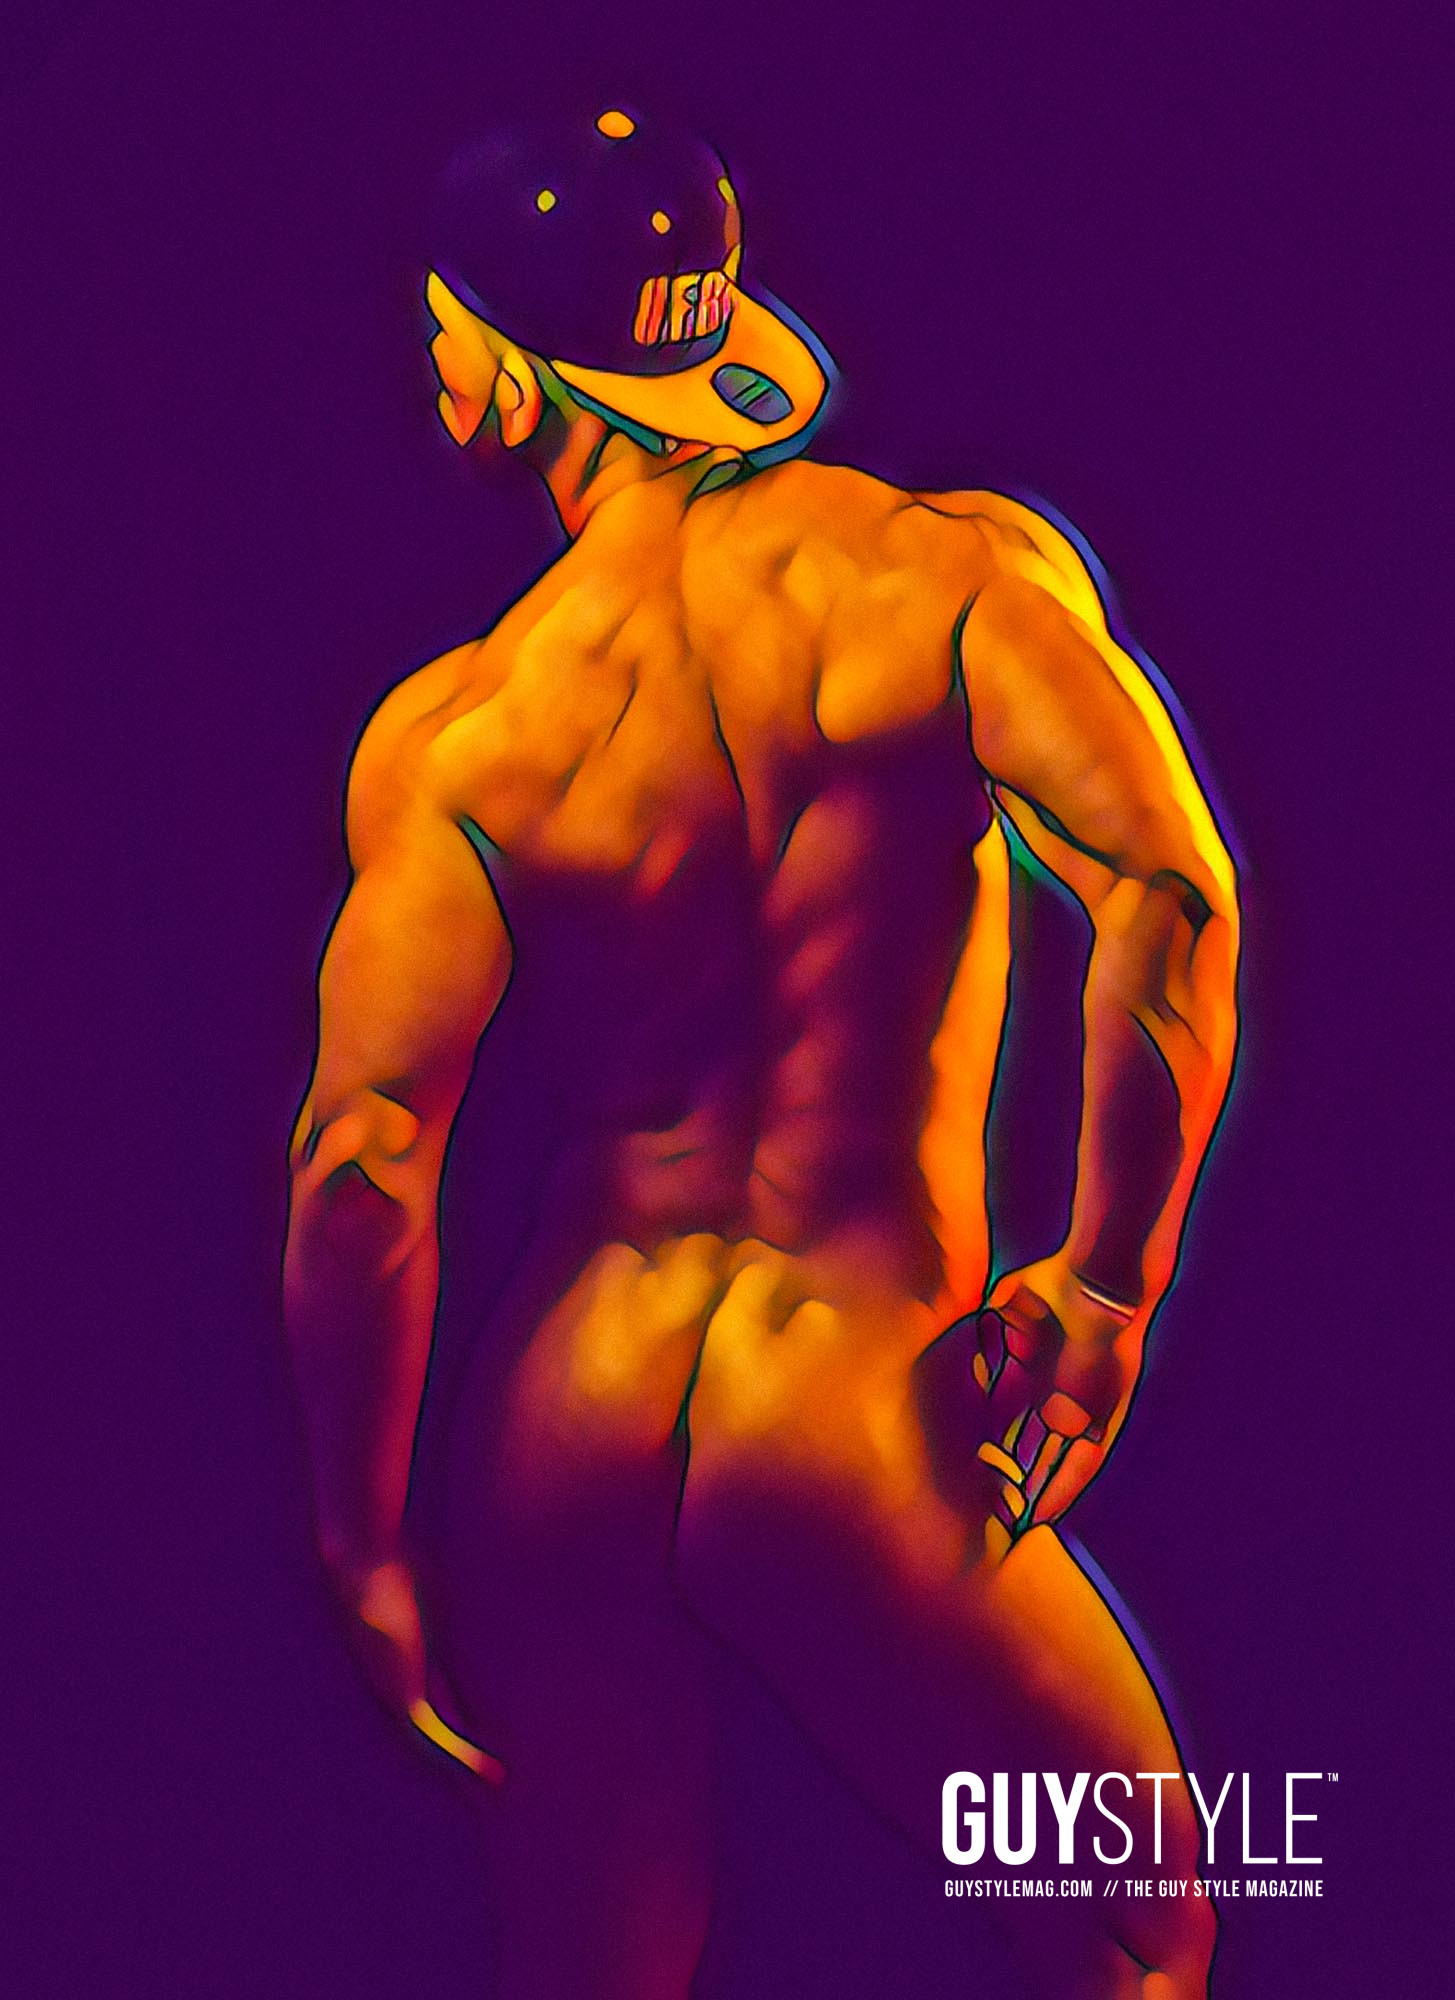 Maxwell Alexander's New Homoerotic Art Drop: A Confluence of AI, Sensuality, and Rebellion – Homoerotic Art ©2023 MAXWELL ALEXANDER